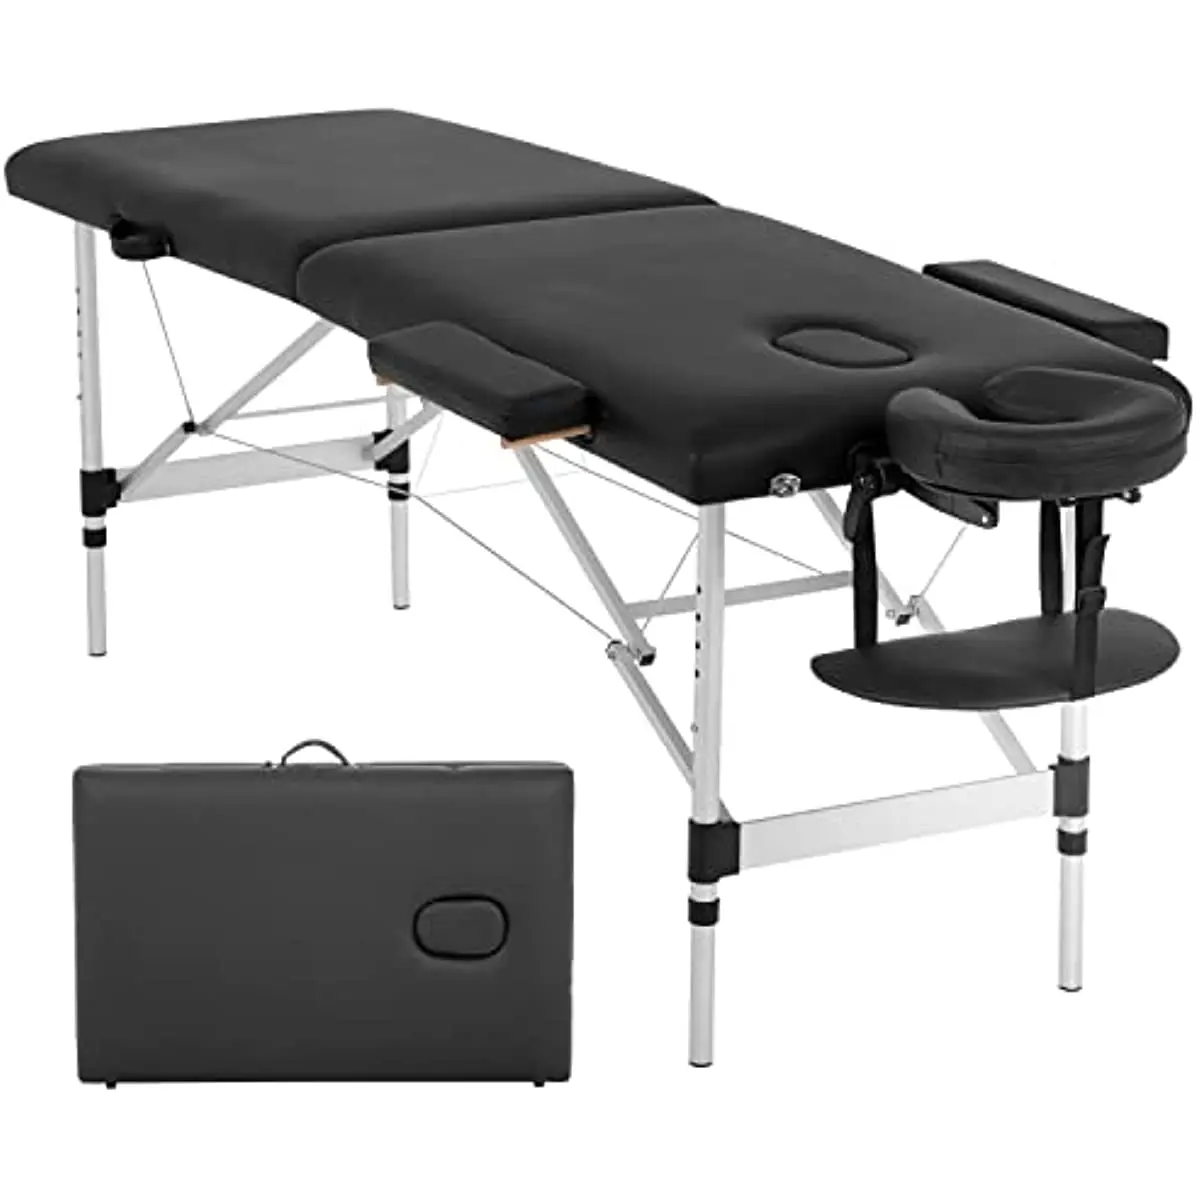 

Table Portable Massage Bed Height Adjustable Spa Bed 2 Fold Facial Tattoo Salon Bed W/Face Cradle Carry Case (Black)